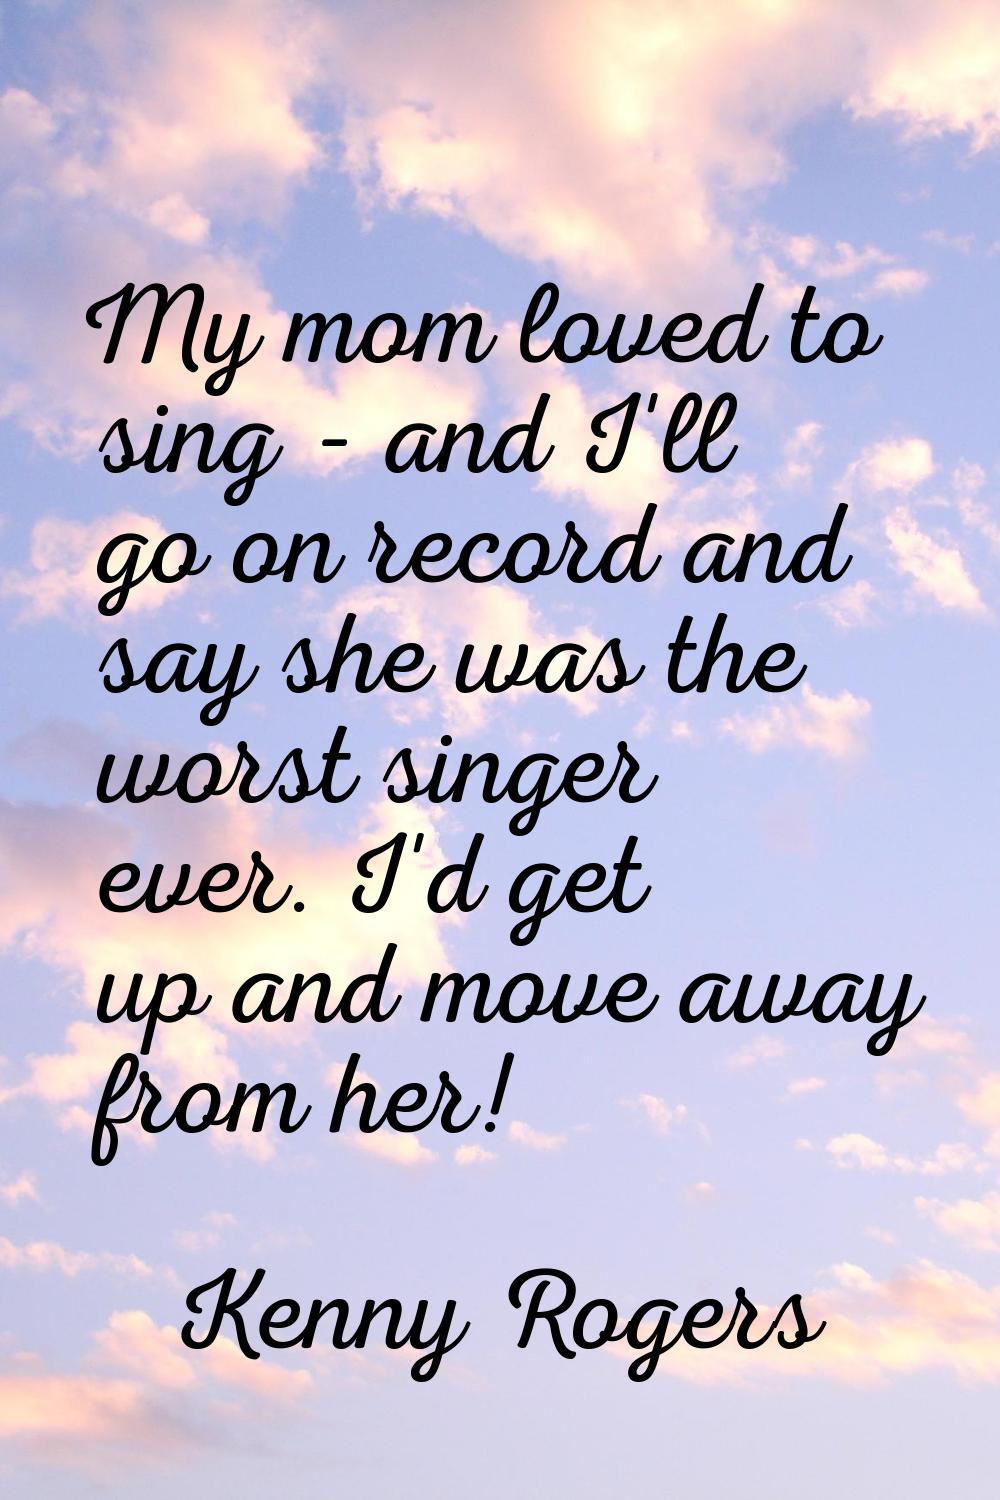 My mom loved to sing - and I'll go on record and say she was the worst singer ever. I'd get up and 